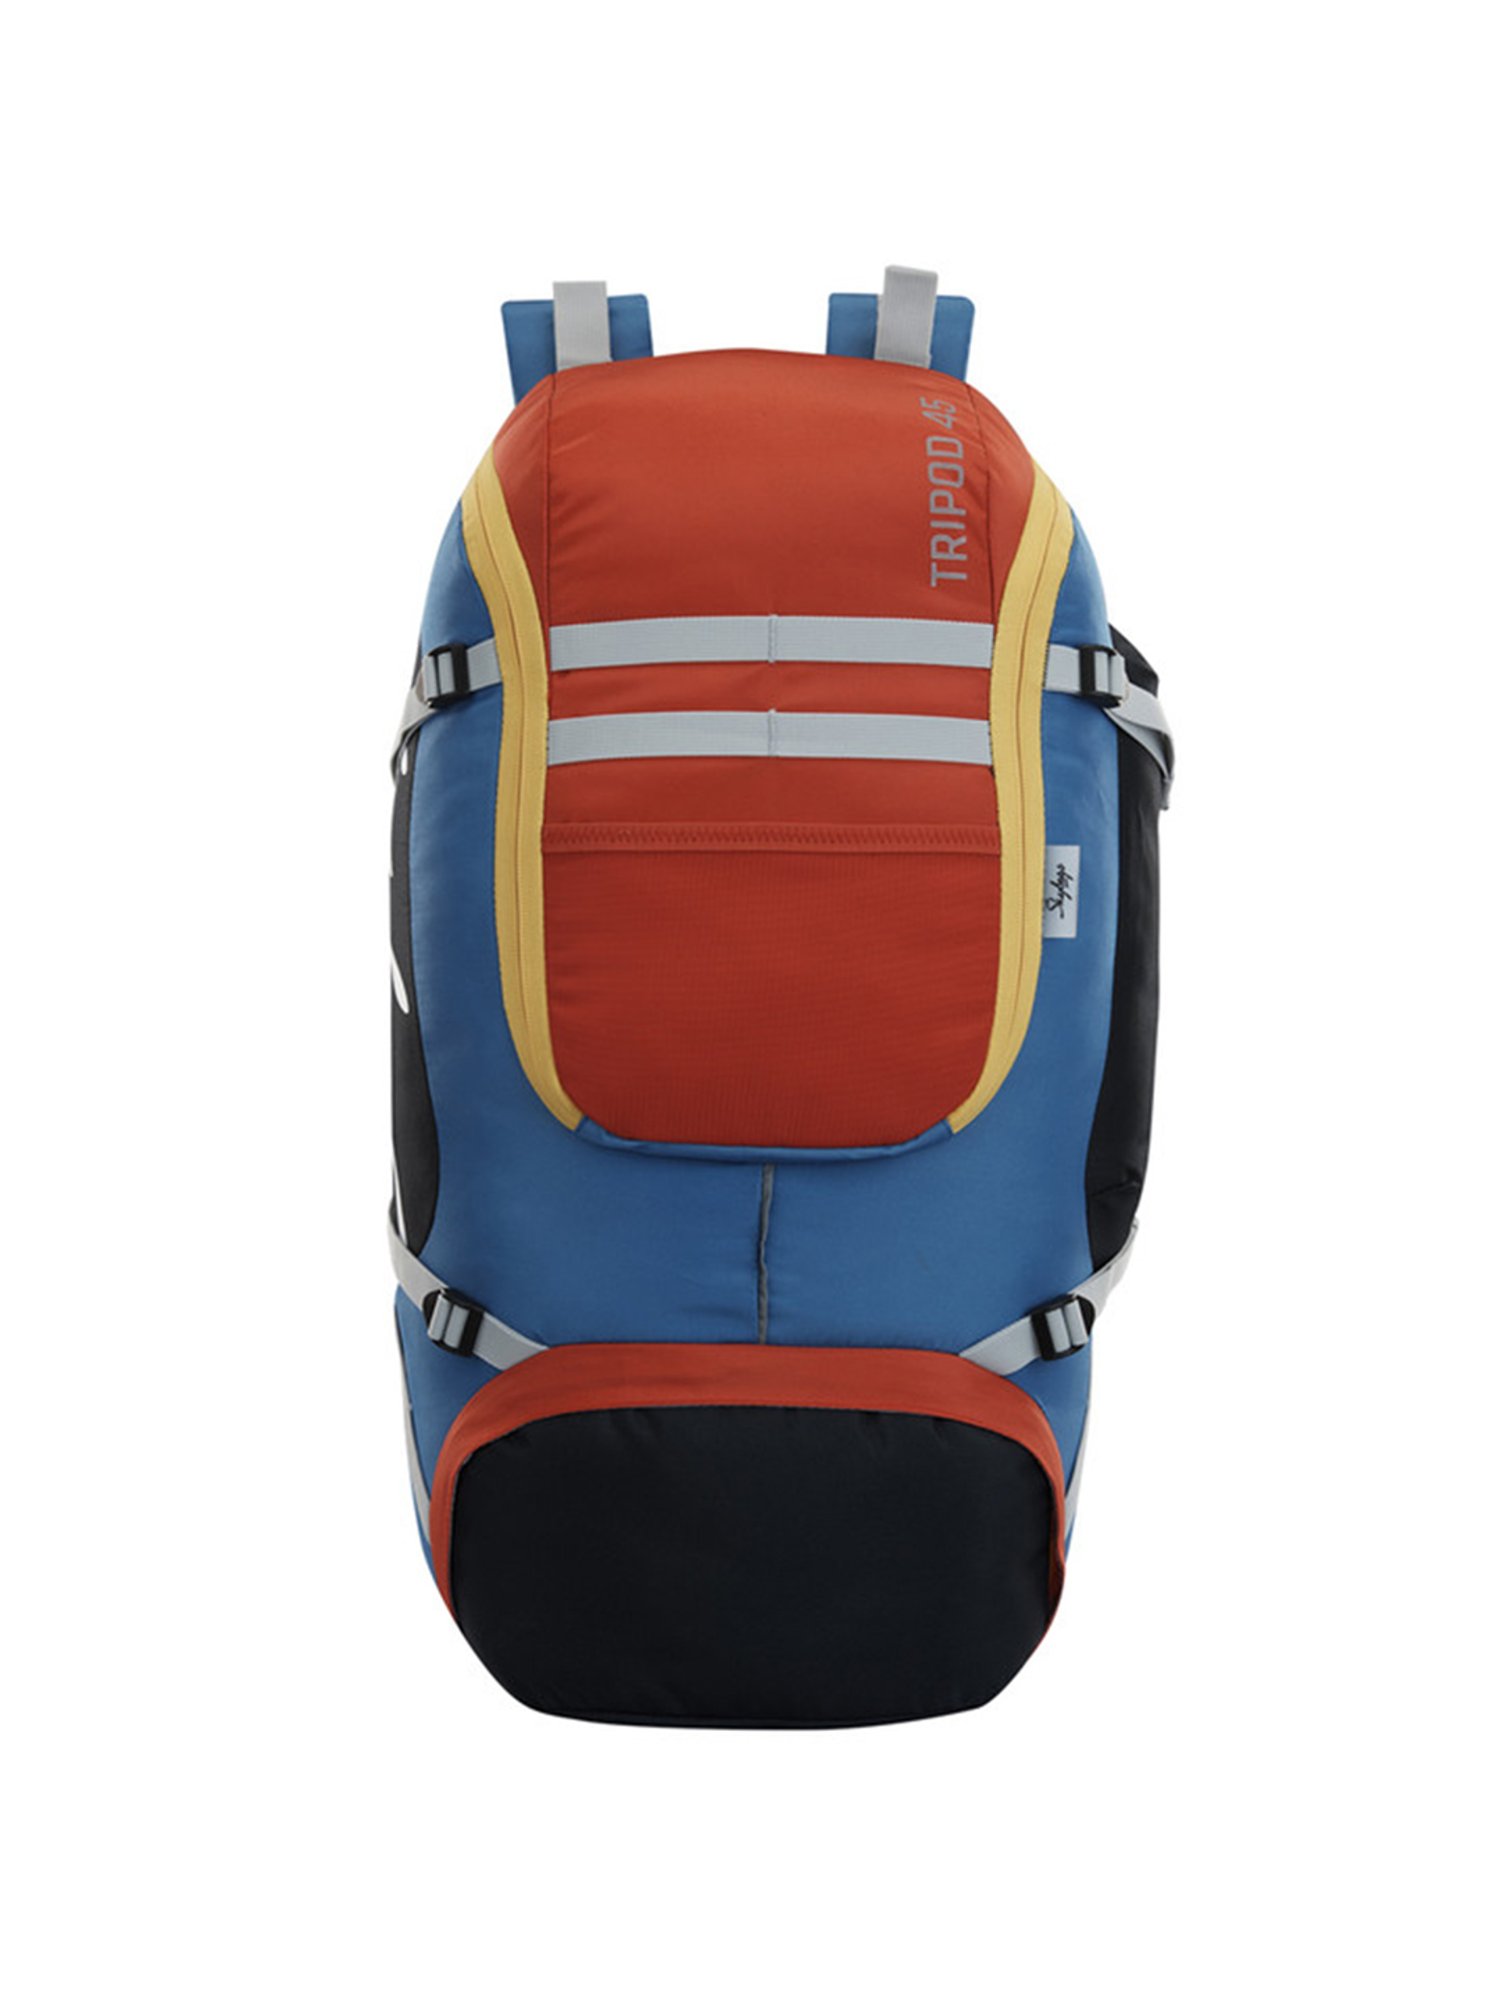 Buy Skybags Beatle Nxt 28L Unisex Red Rucksack at Amazonin